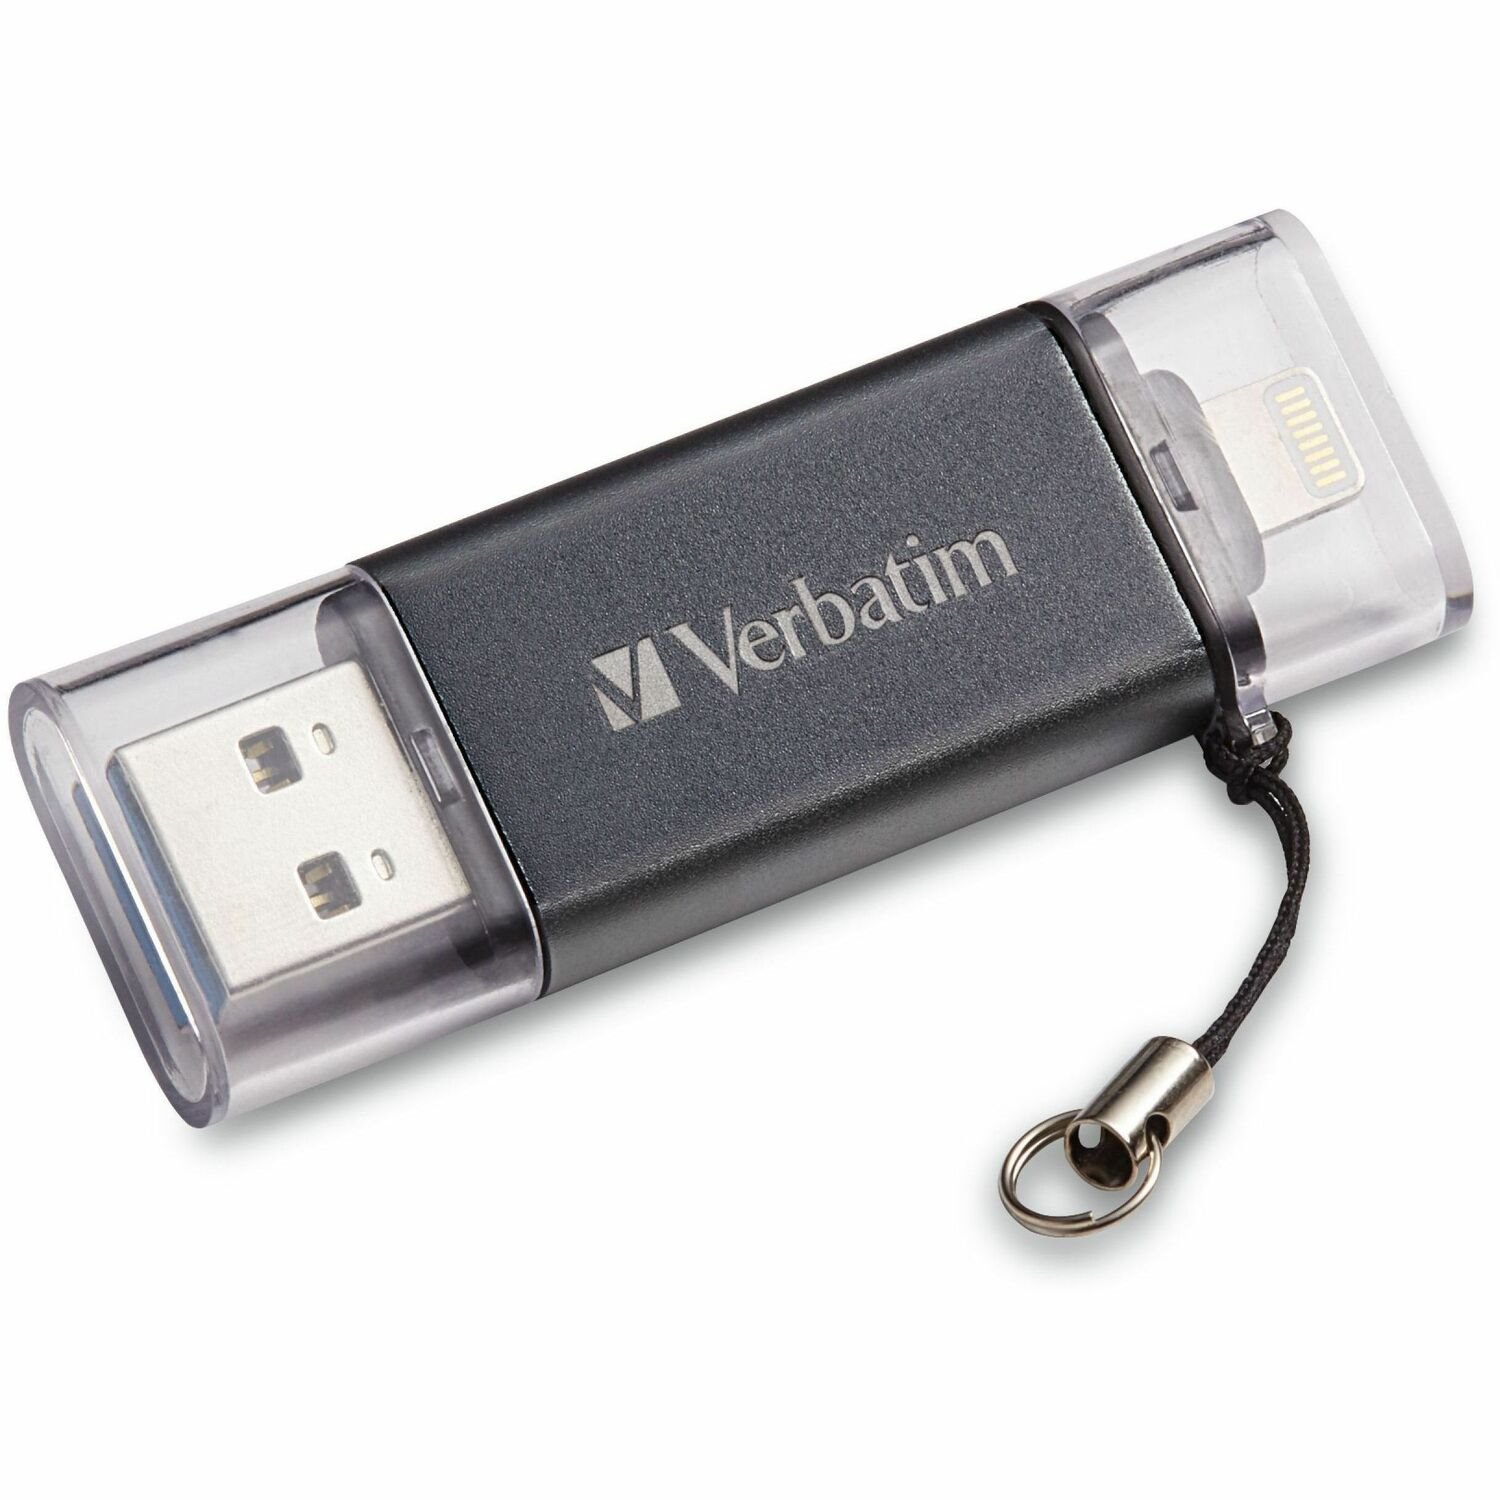 128GB Store 'n' Go Dual USB 3.2 Gen 1 Flash Drive for Apple Lightning Devices - Graphite